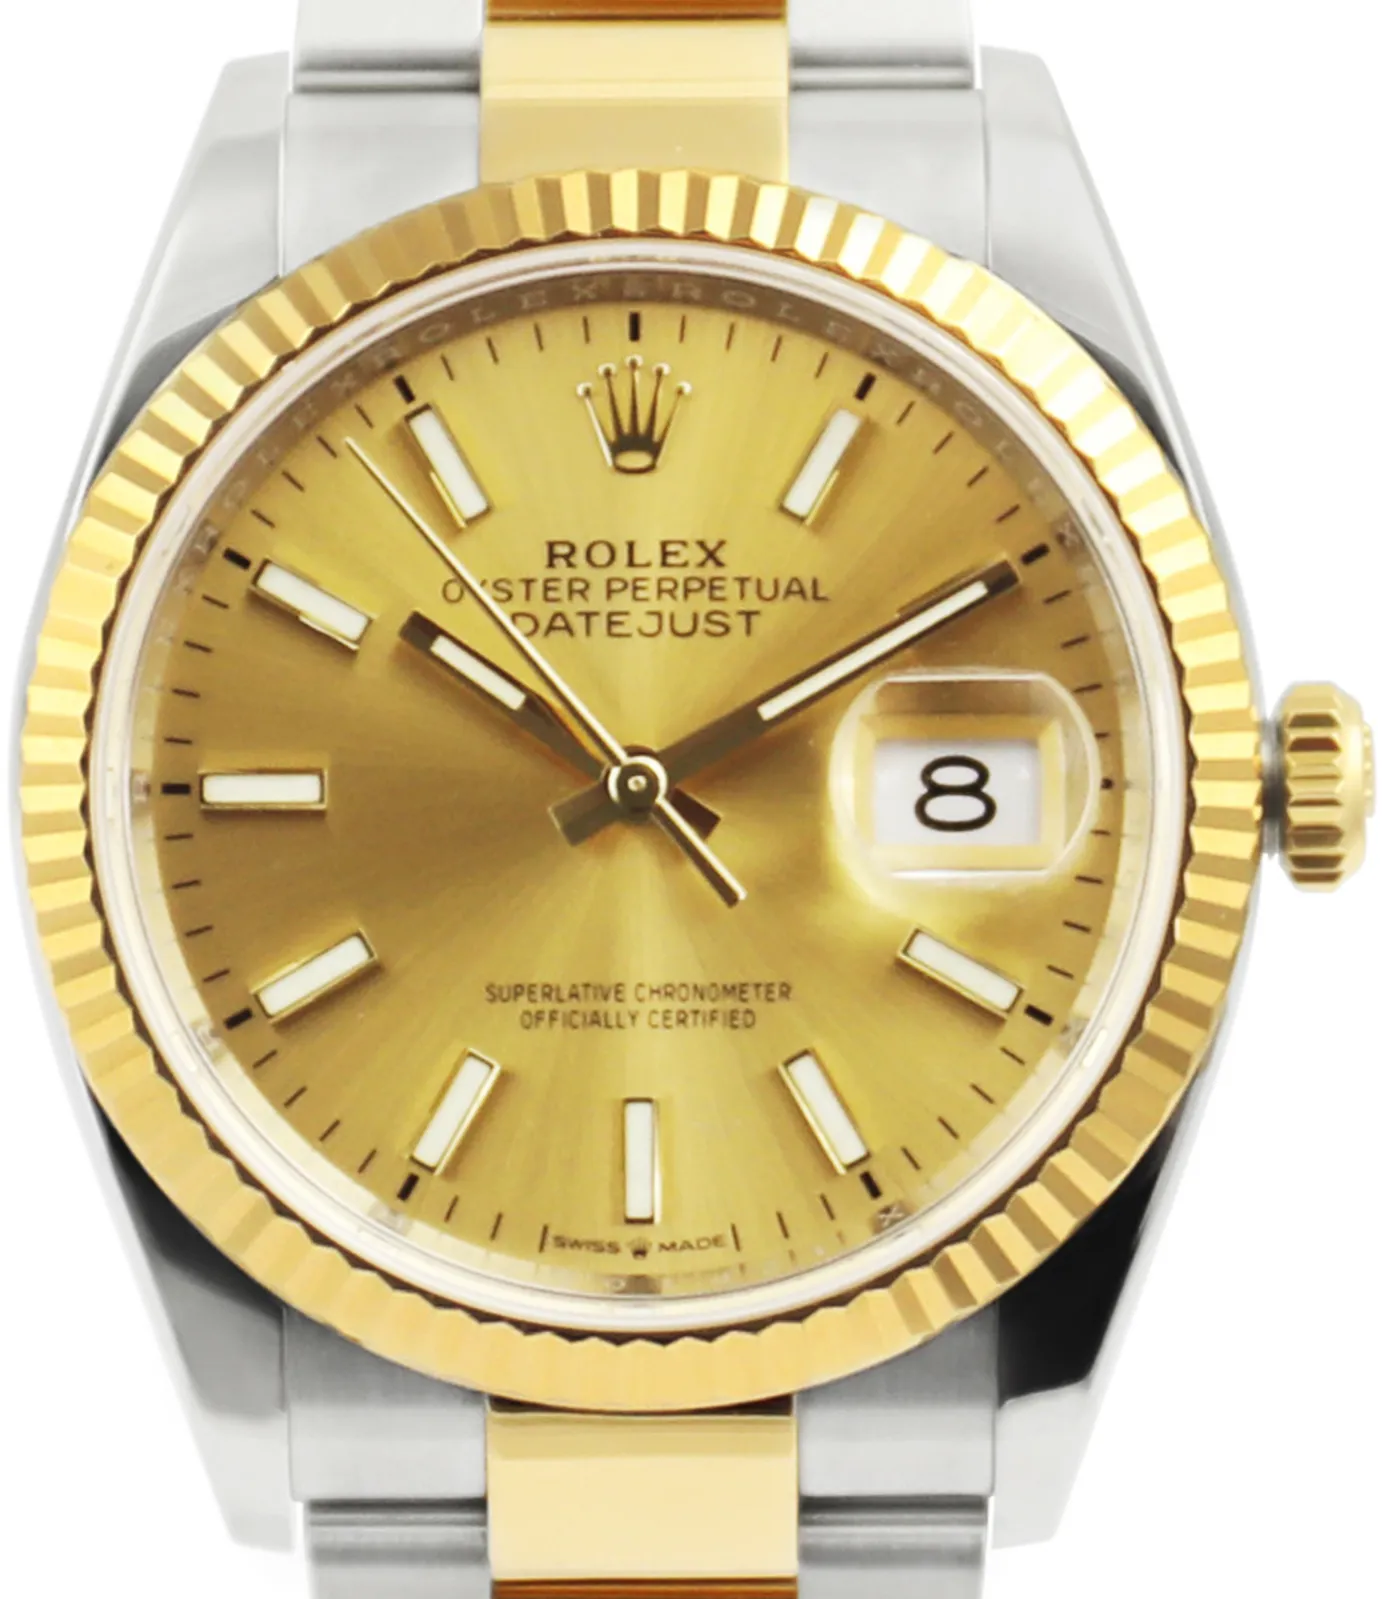 Rolex Datejust 126233 36mm Yellow gold and stainless steel Champagne